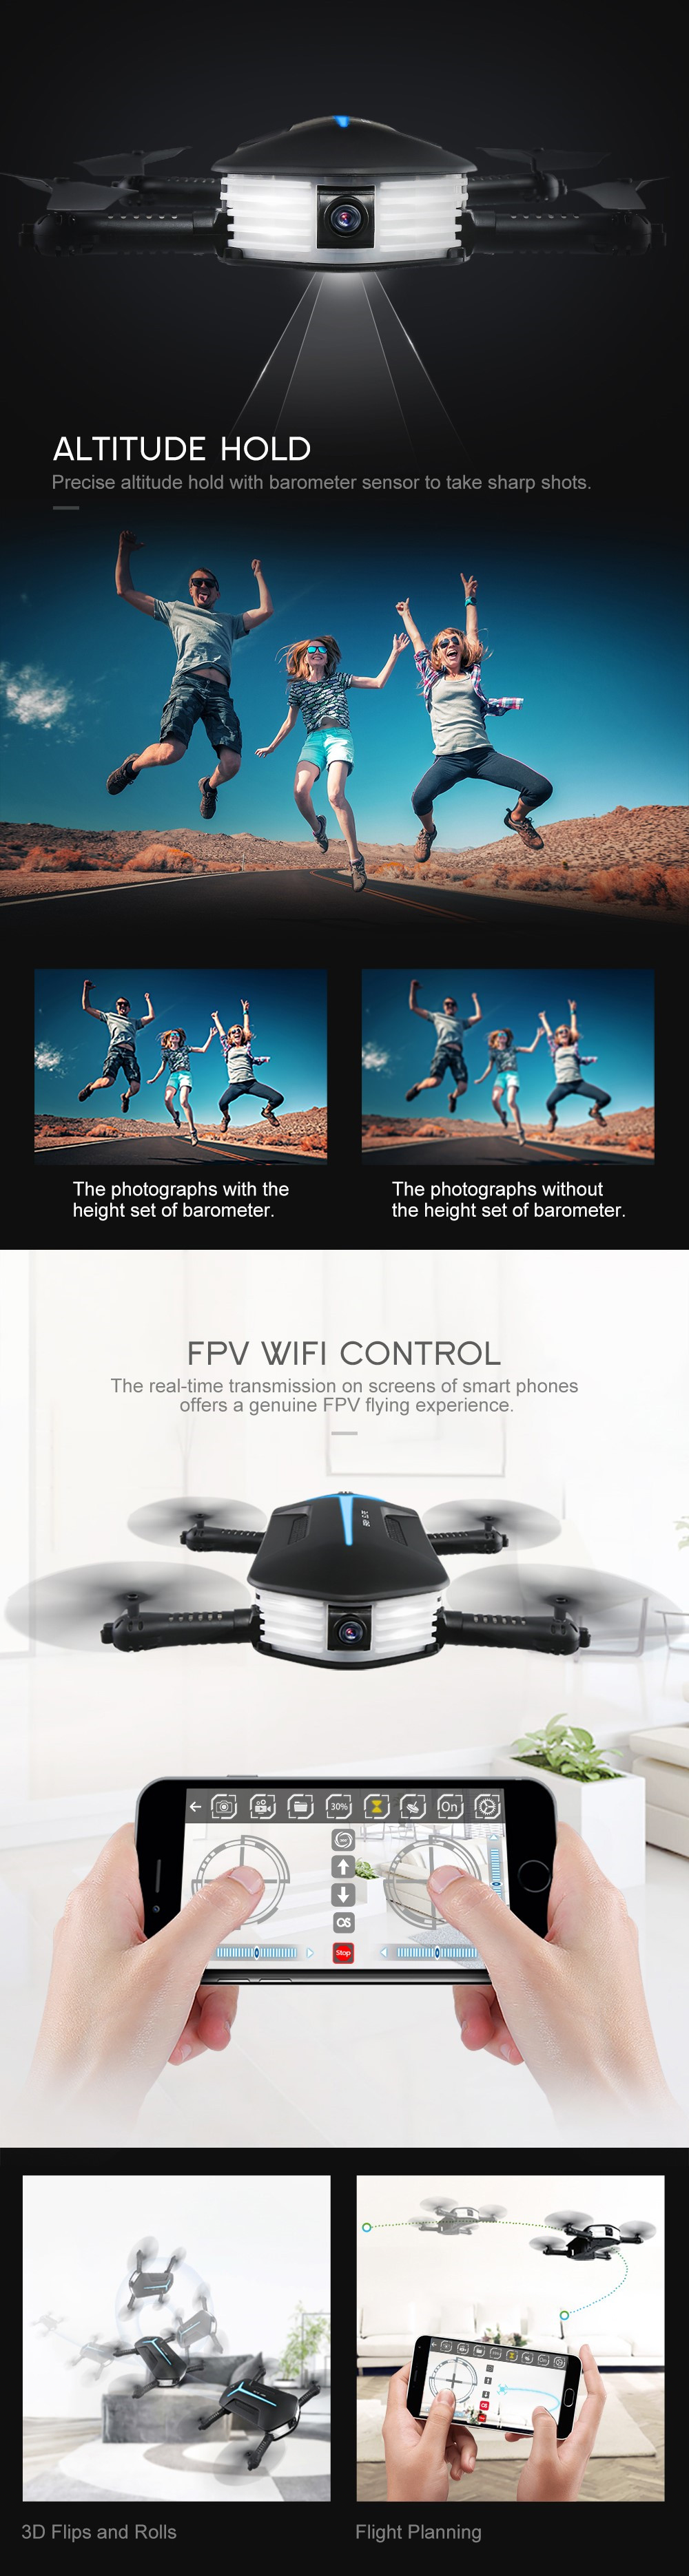 JJRC-H37-Mini-Baby-Elfie-720P-WIFI-FPV-With-Beauty-Mode-Altitude-Hold-RC-Drone-Quadcopter-RTF-1893924-8